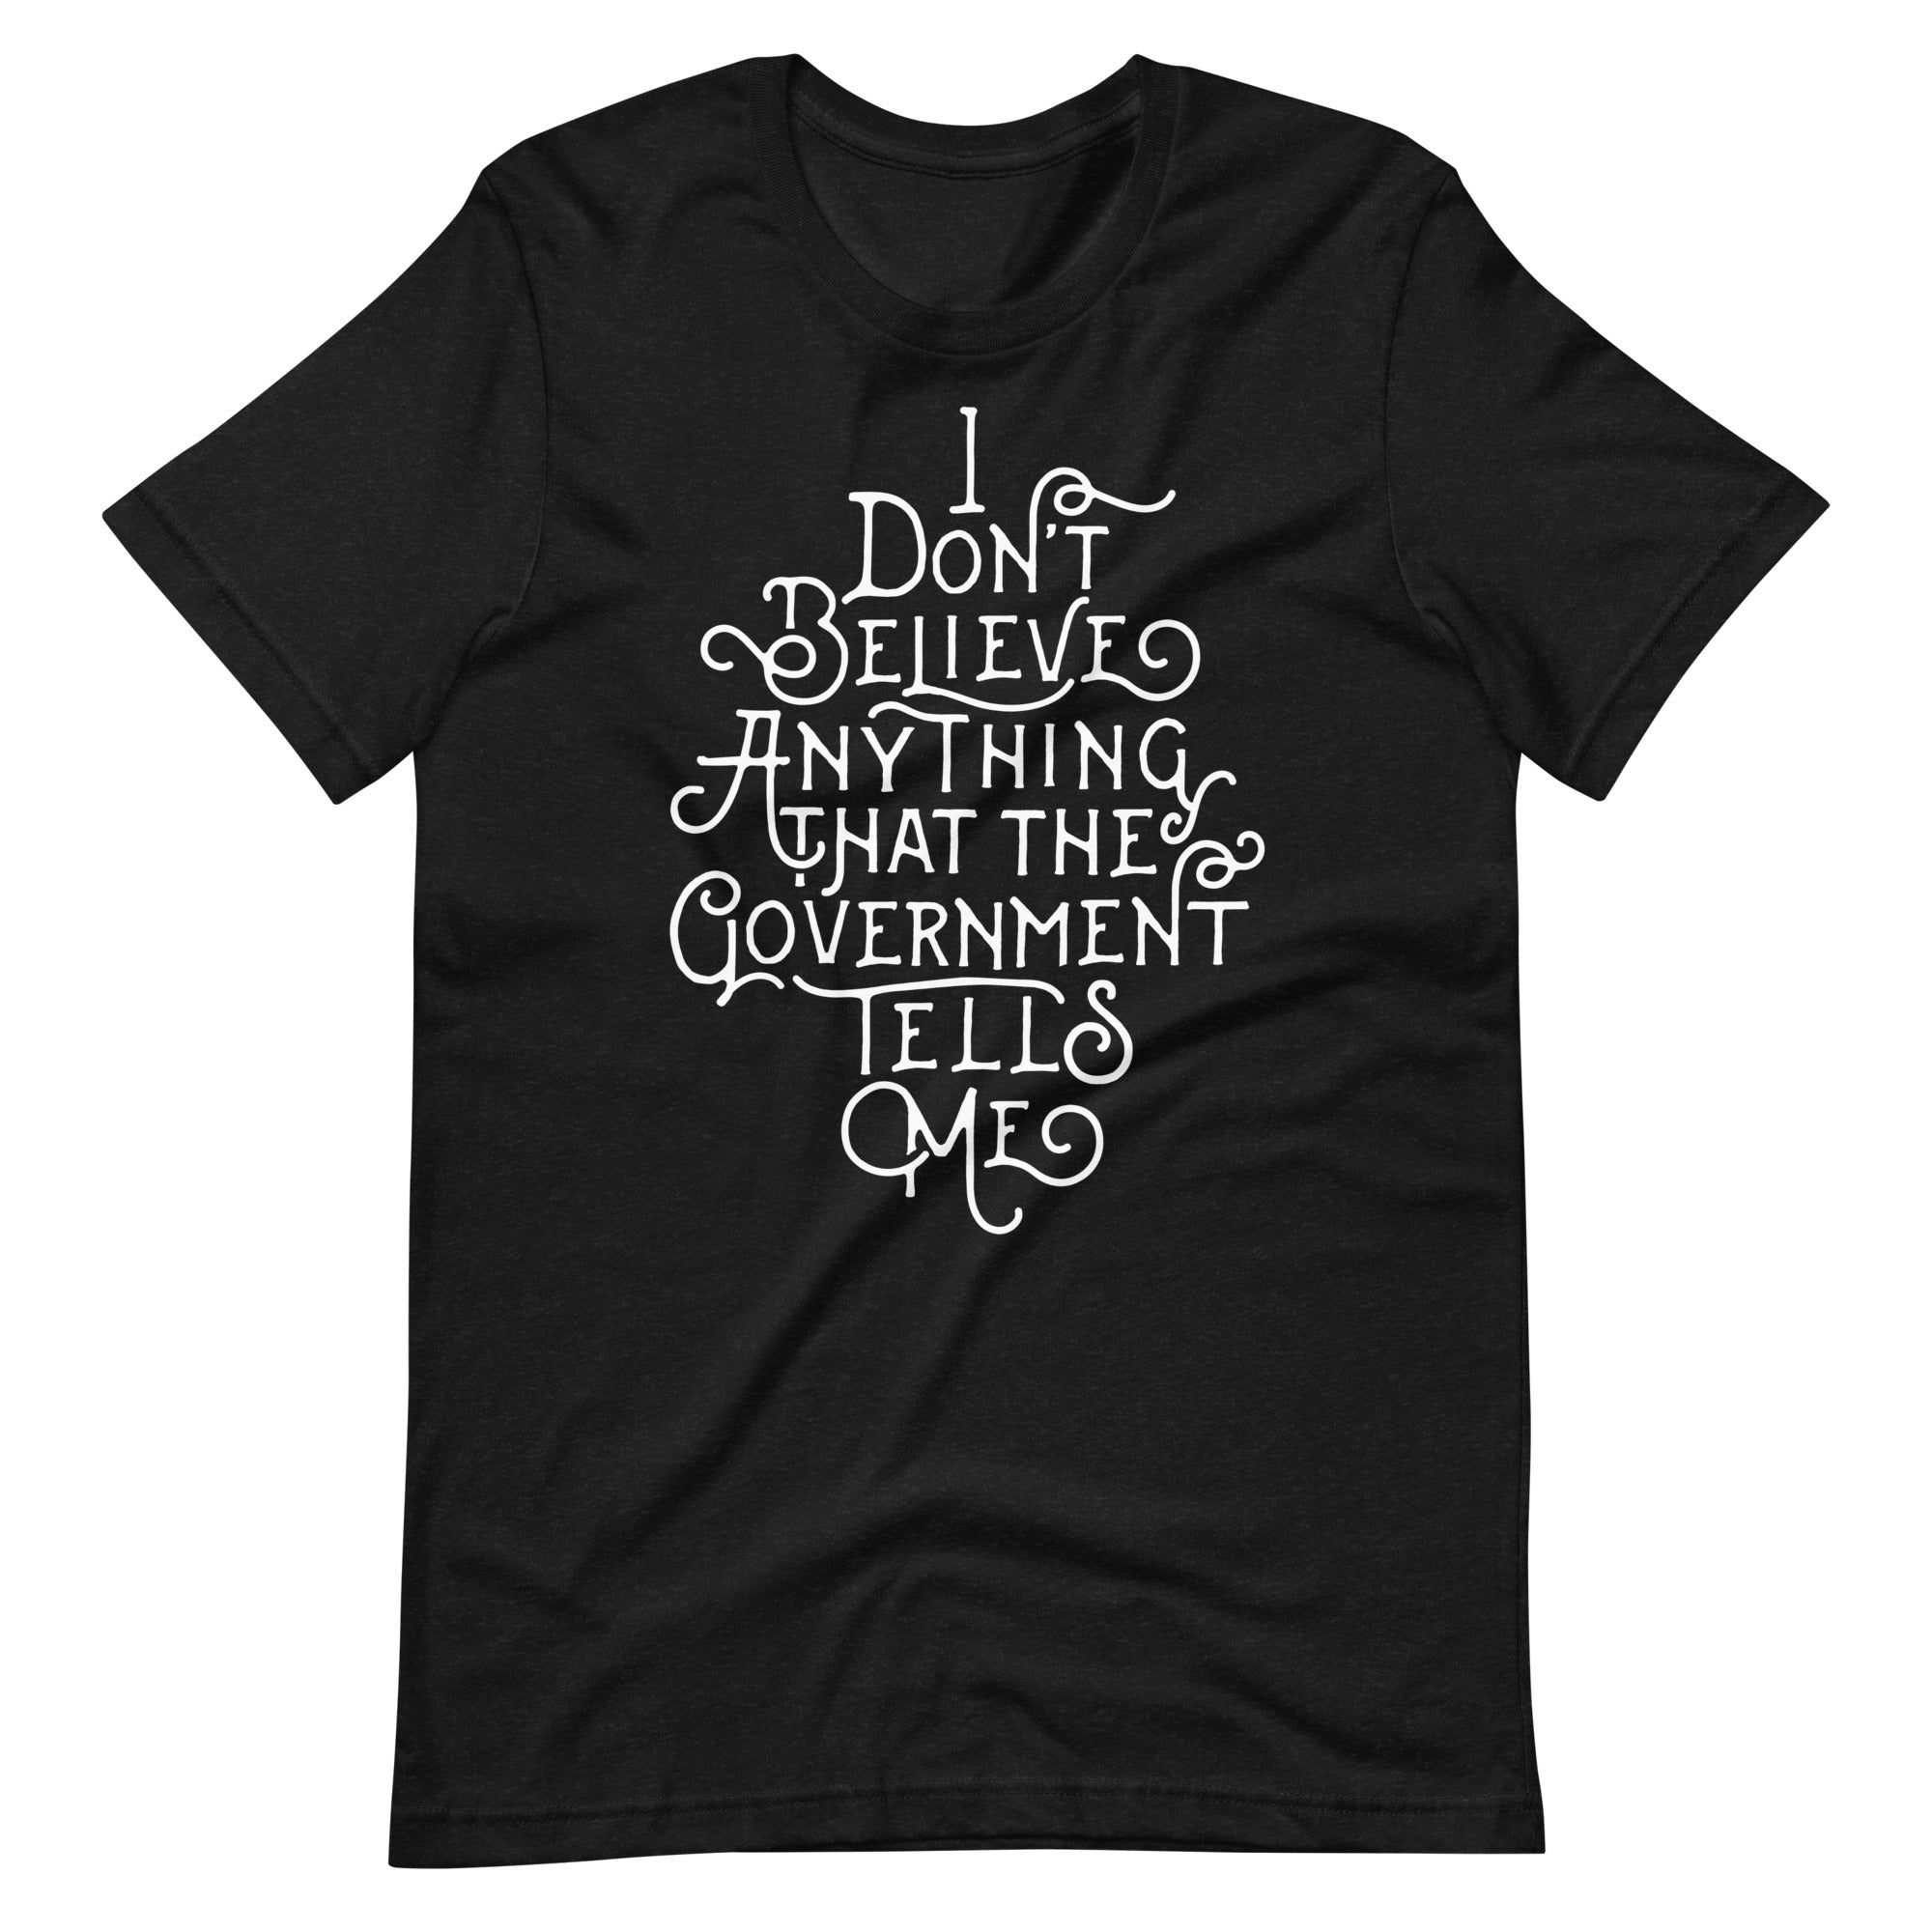 I Don't Believe Anything That the Government Tells Me Graphic T-Shirt